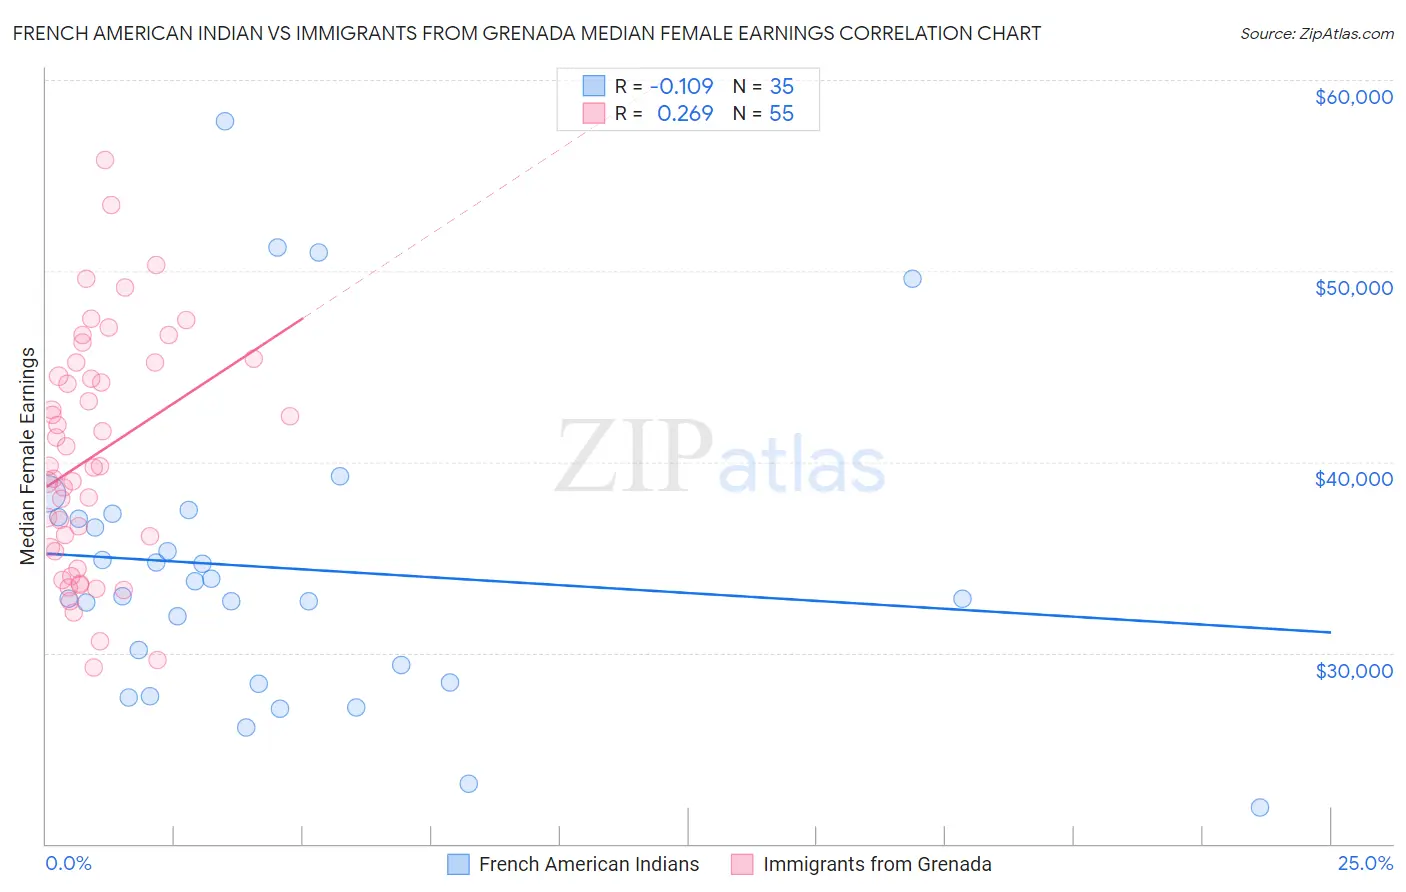 French American Indian vs Immigrants from Grenada Median Female Earnings